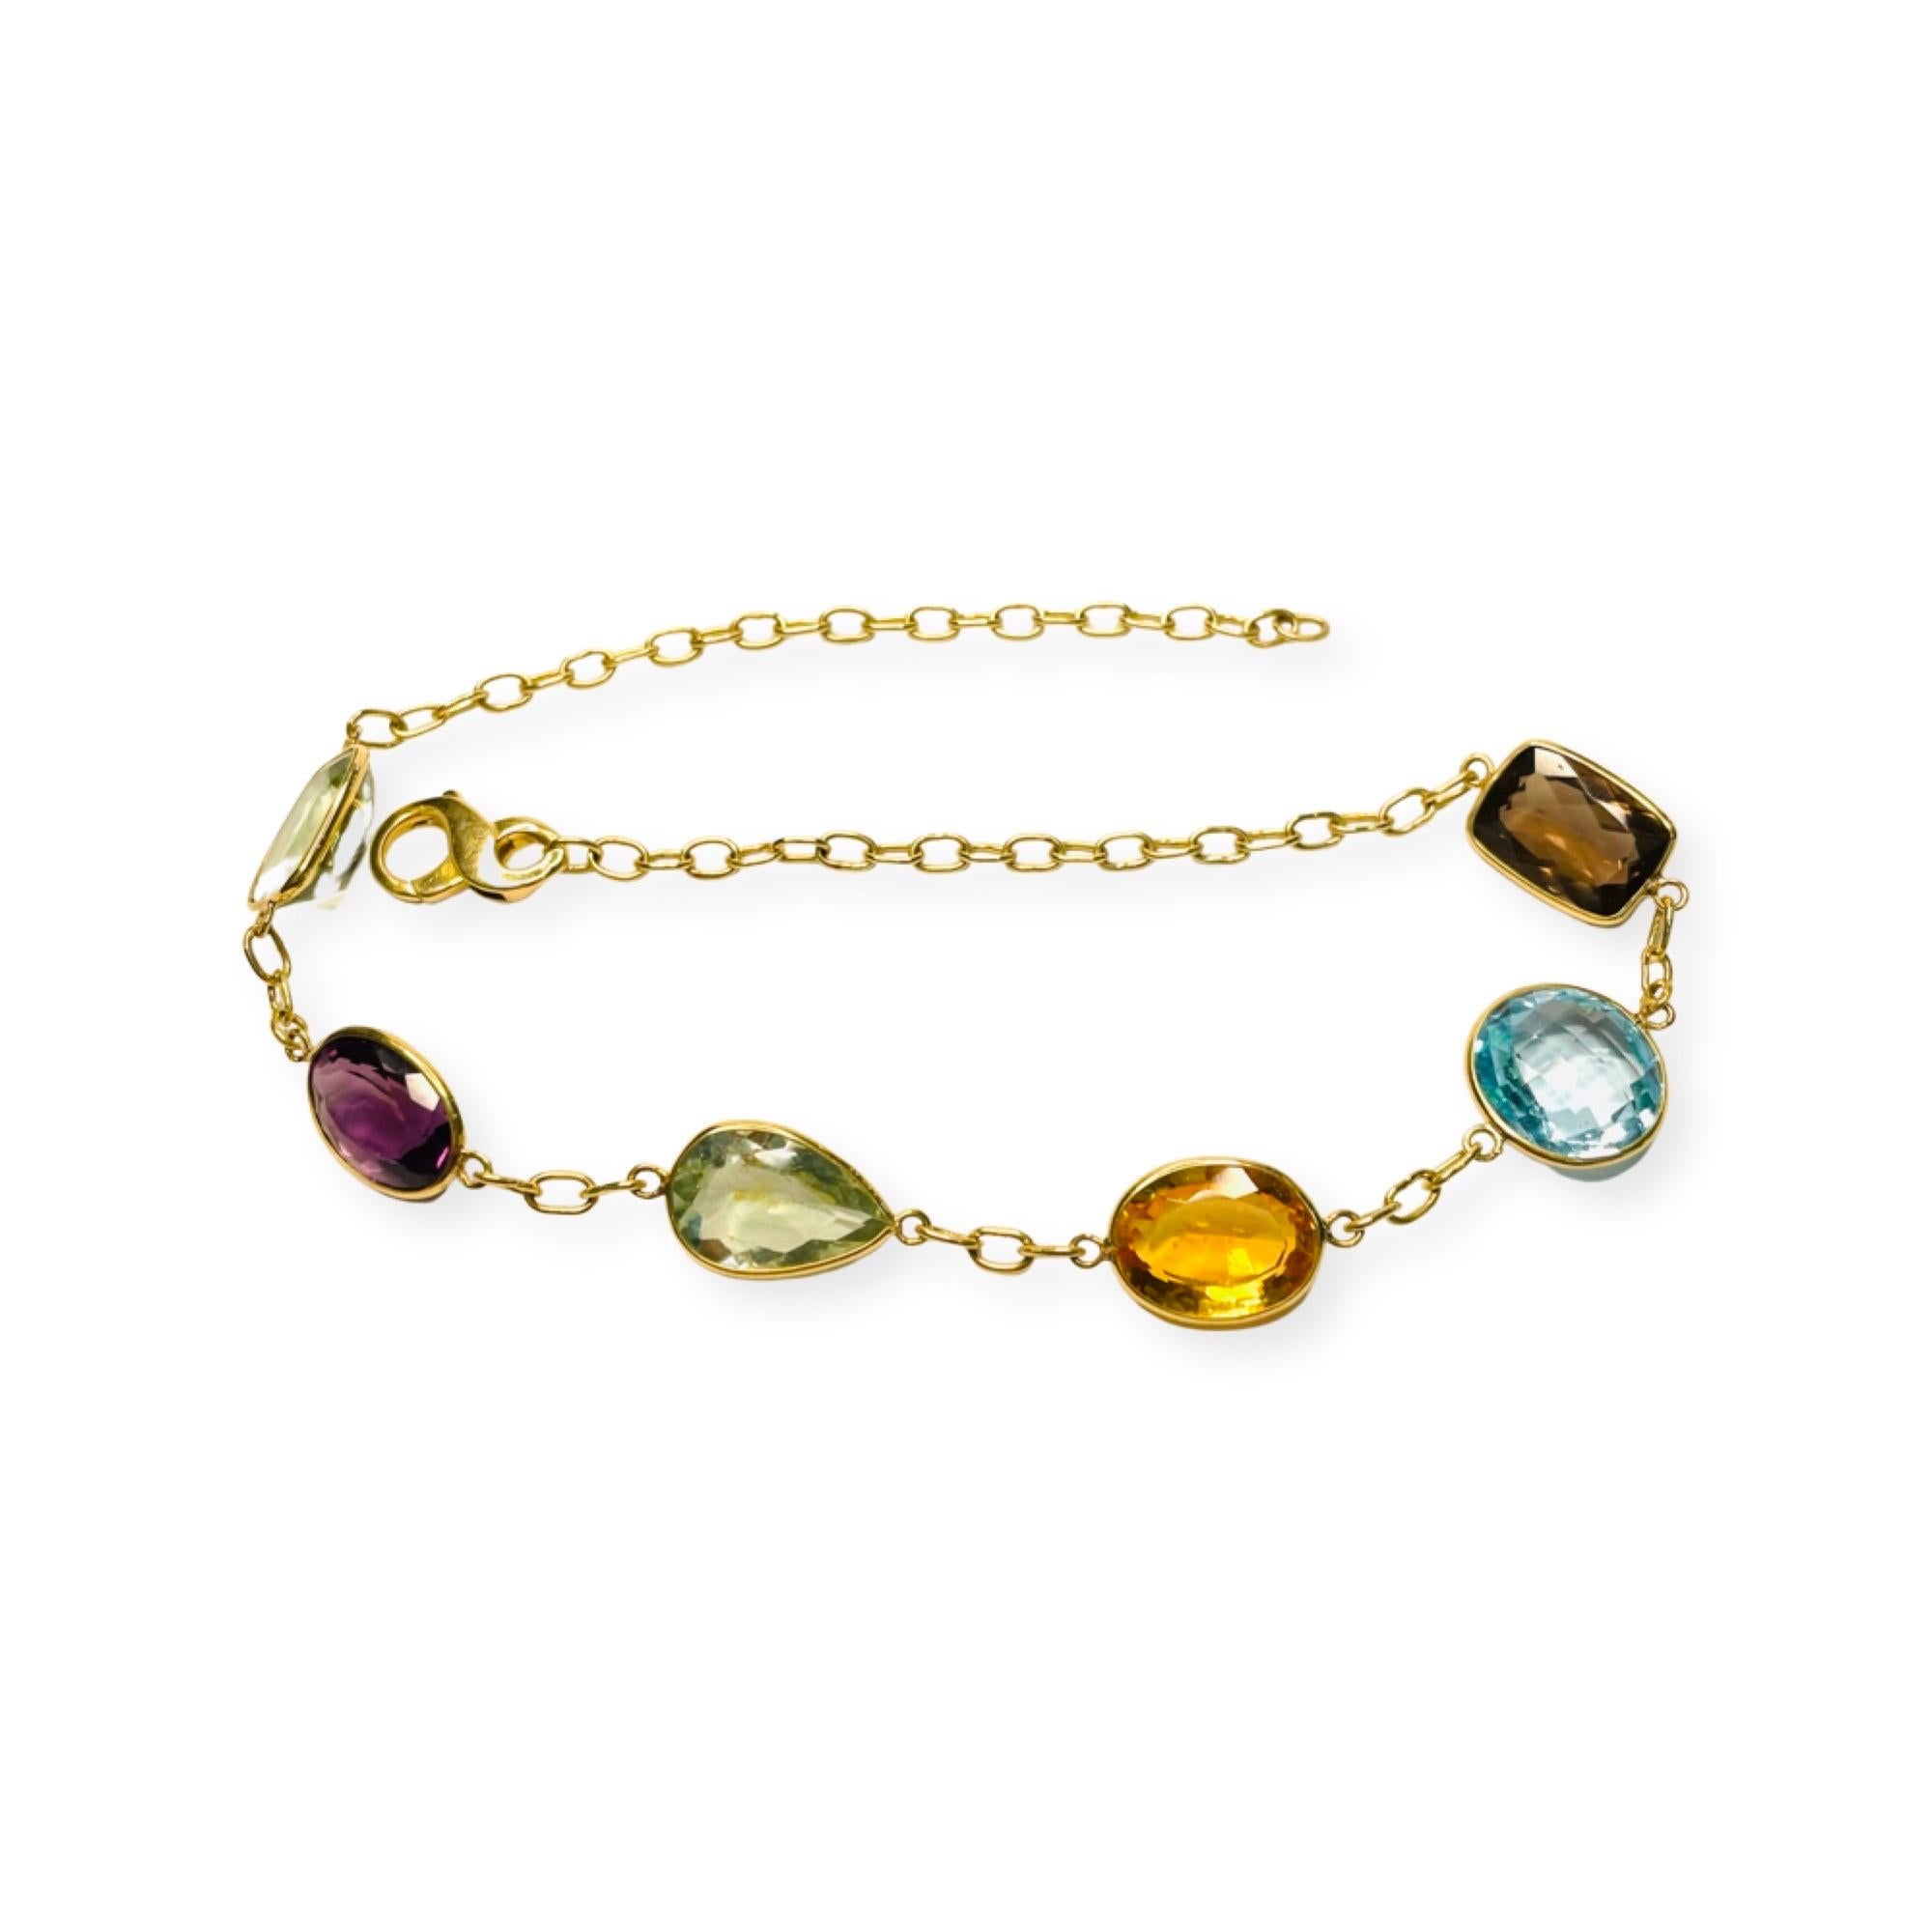 Lithos 18K Yellow Gold Handmade Smoky Quartz, Blue Topaz, Citrine, Amethyst and 2-Green Quartz Necklace. This necklace is handmade, including the solid link chain. The links are 5.5 mm x 4.5 mm. It terminates with a lobster closure. The gemstones 